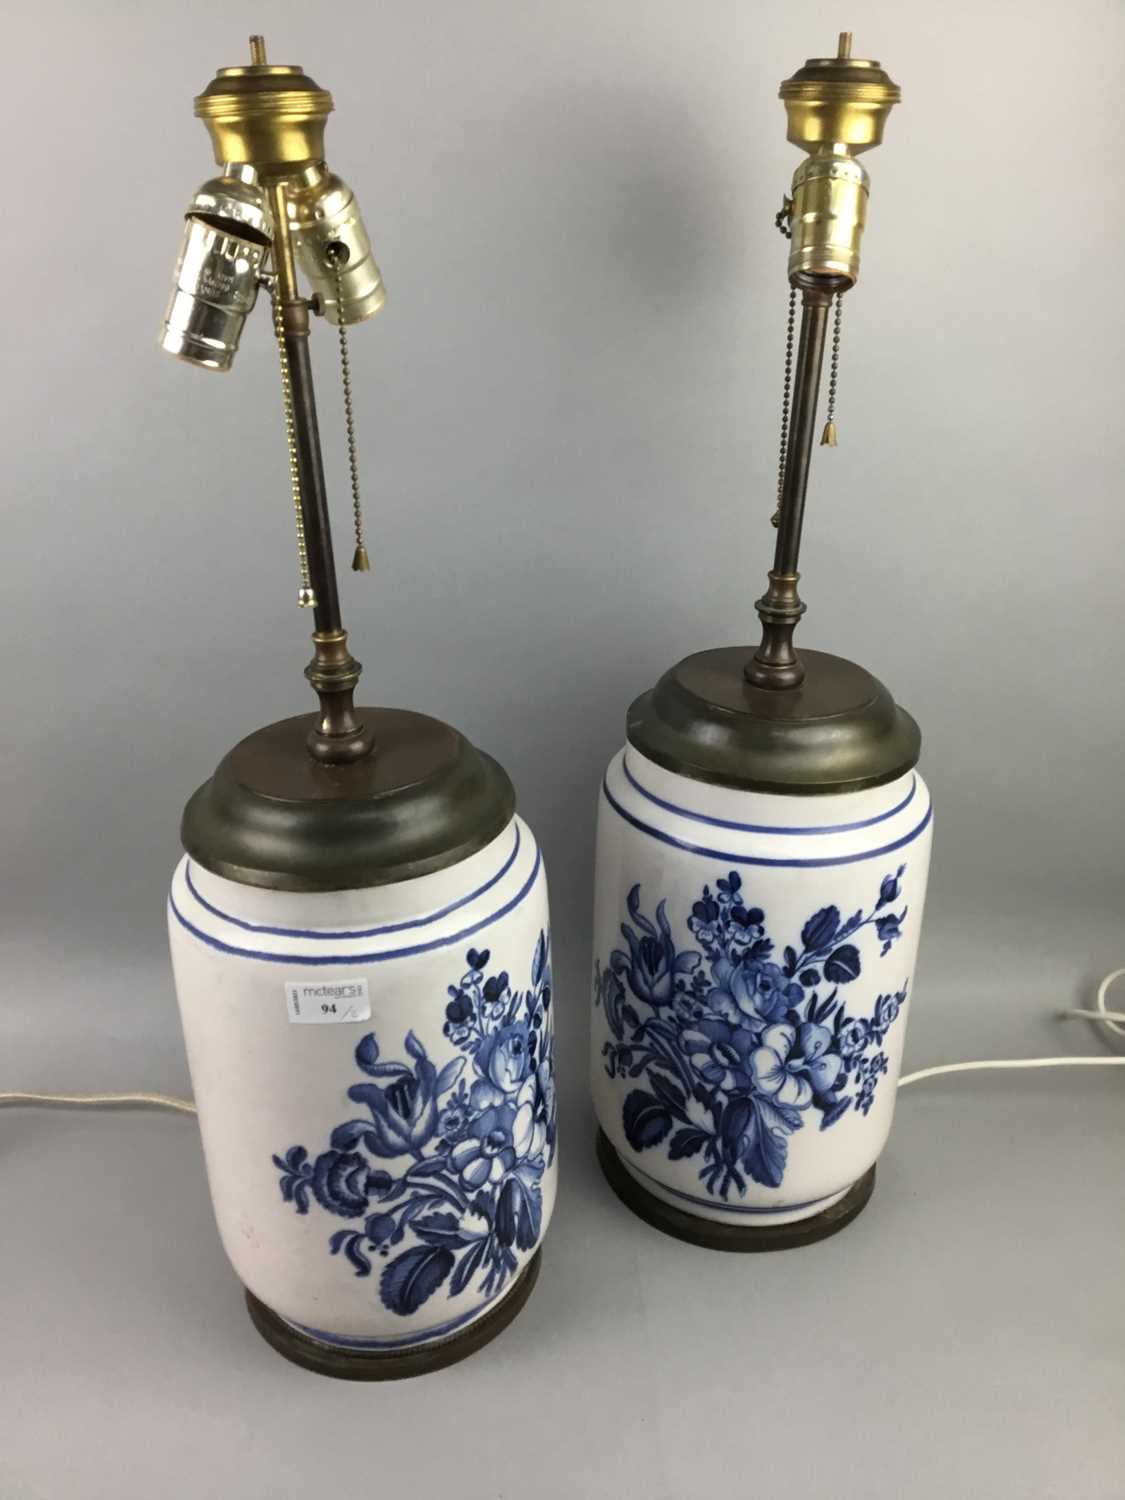 Lot 94 - A PAIR OF DELFT STYLE BLUE AND WHITE CERAMIC TABLE LAMPS